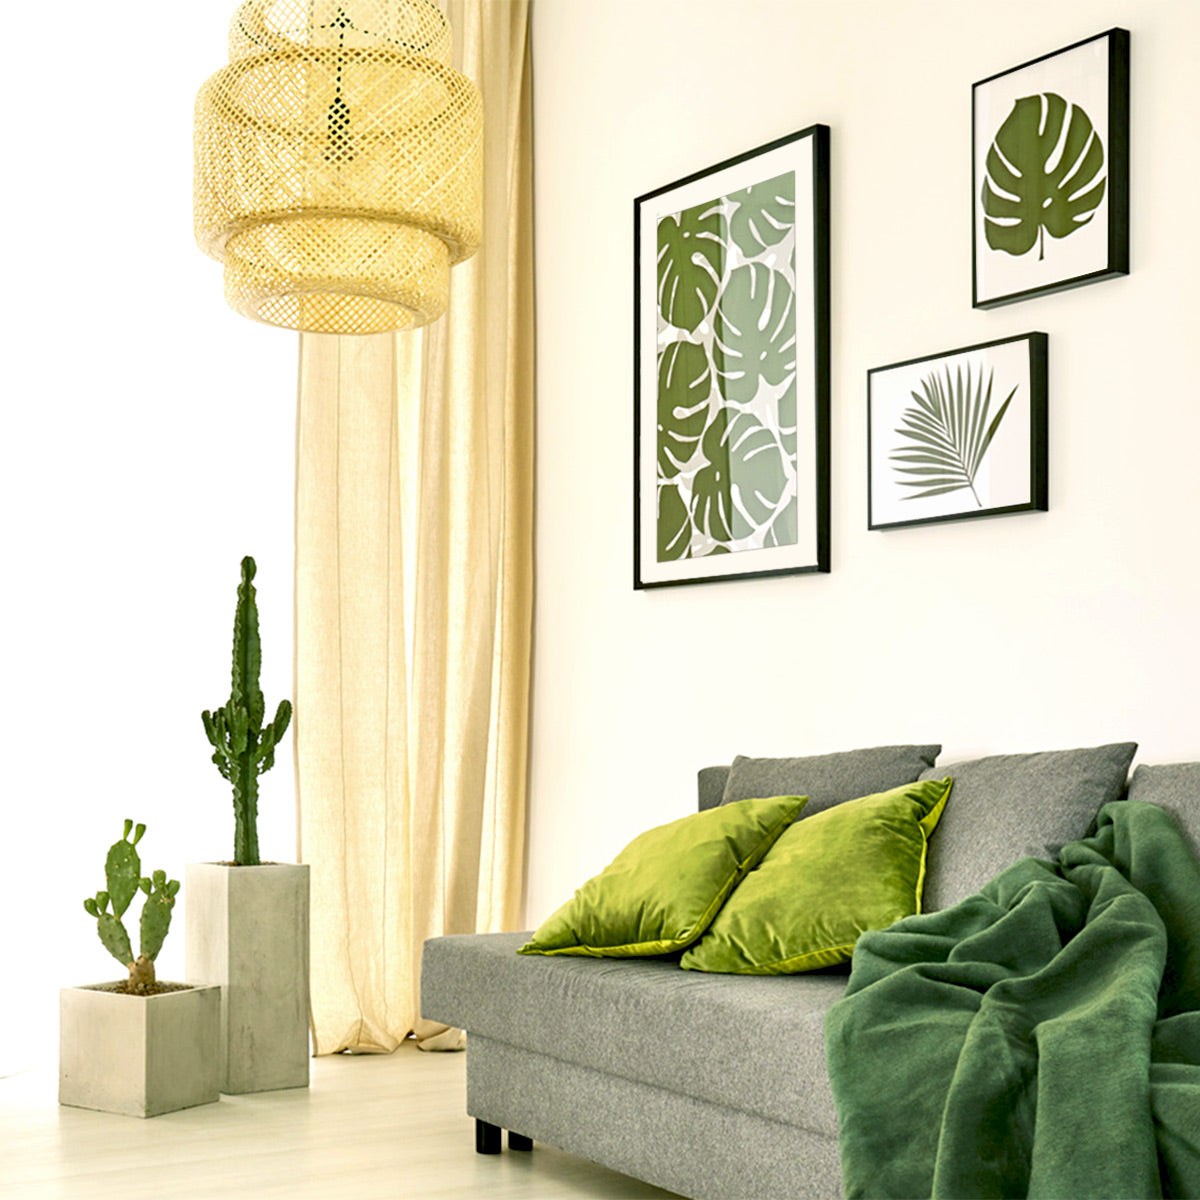 Decorating with greenery and Posterjack photo art prints - interior design tips